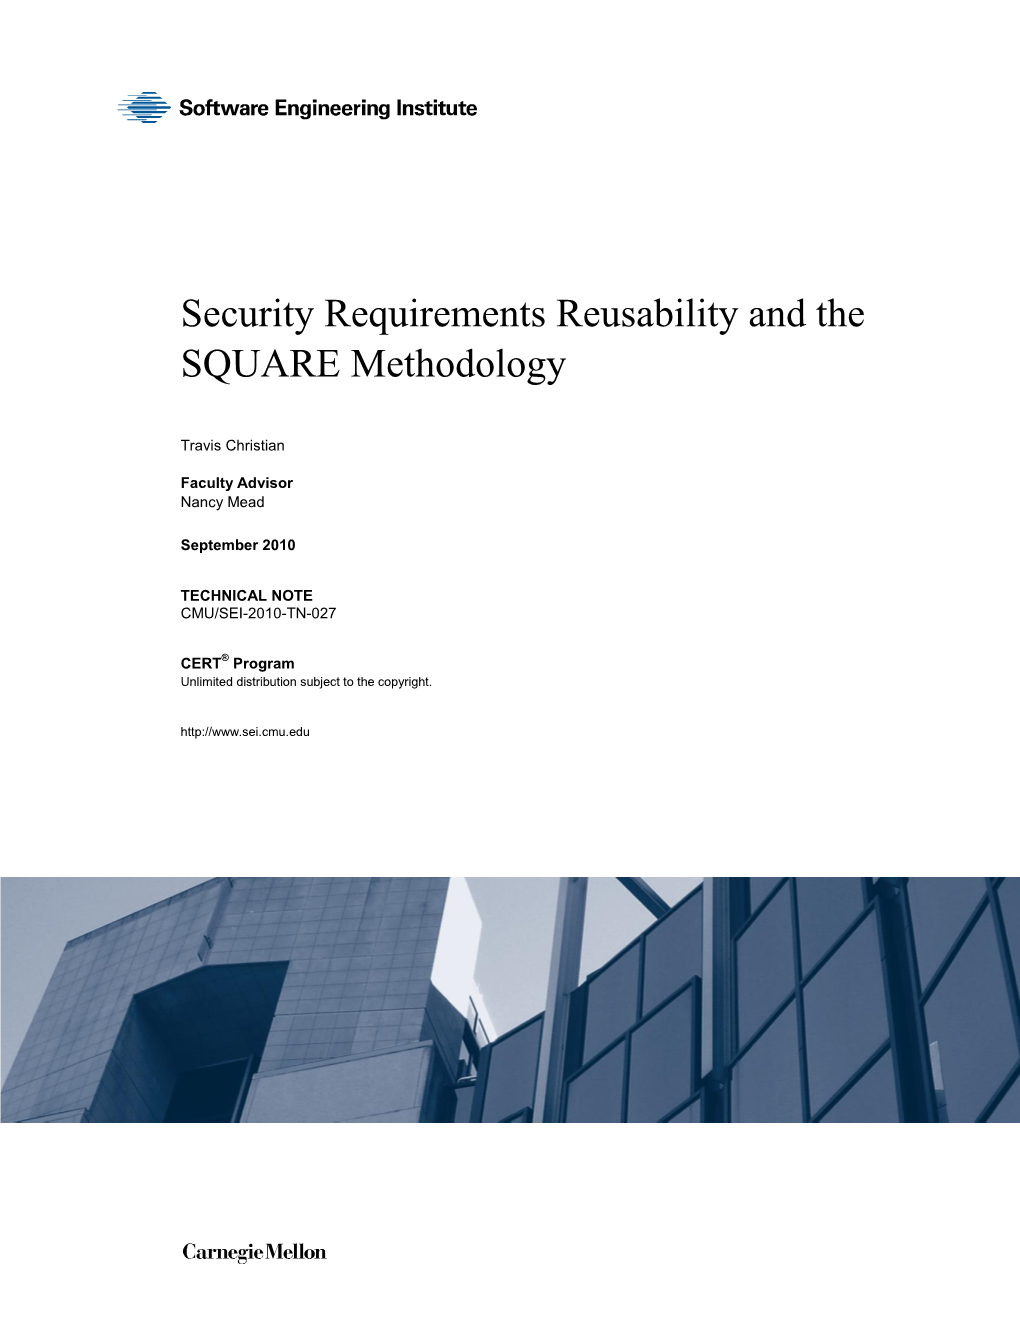 Security Requirements Reusability and the SQUARE Methodology